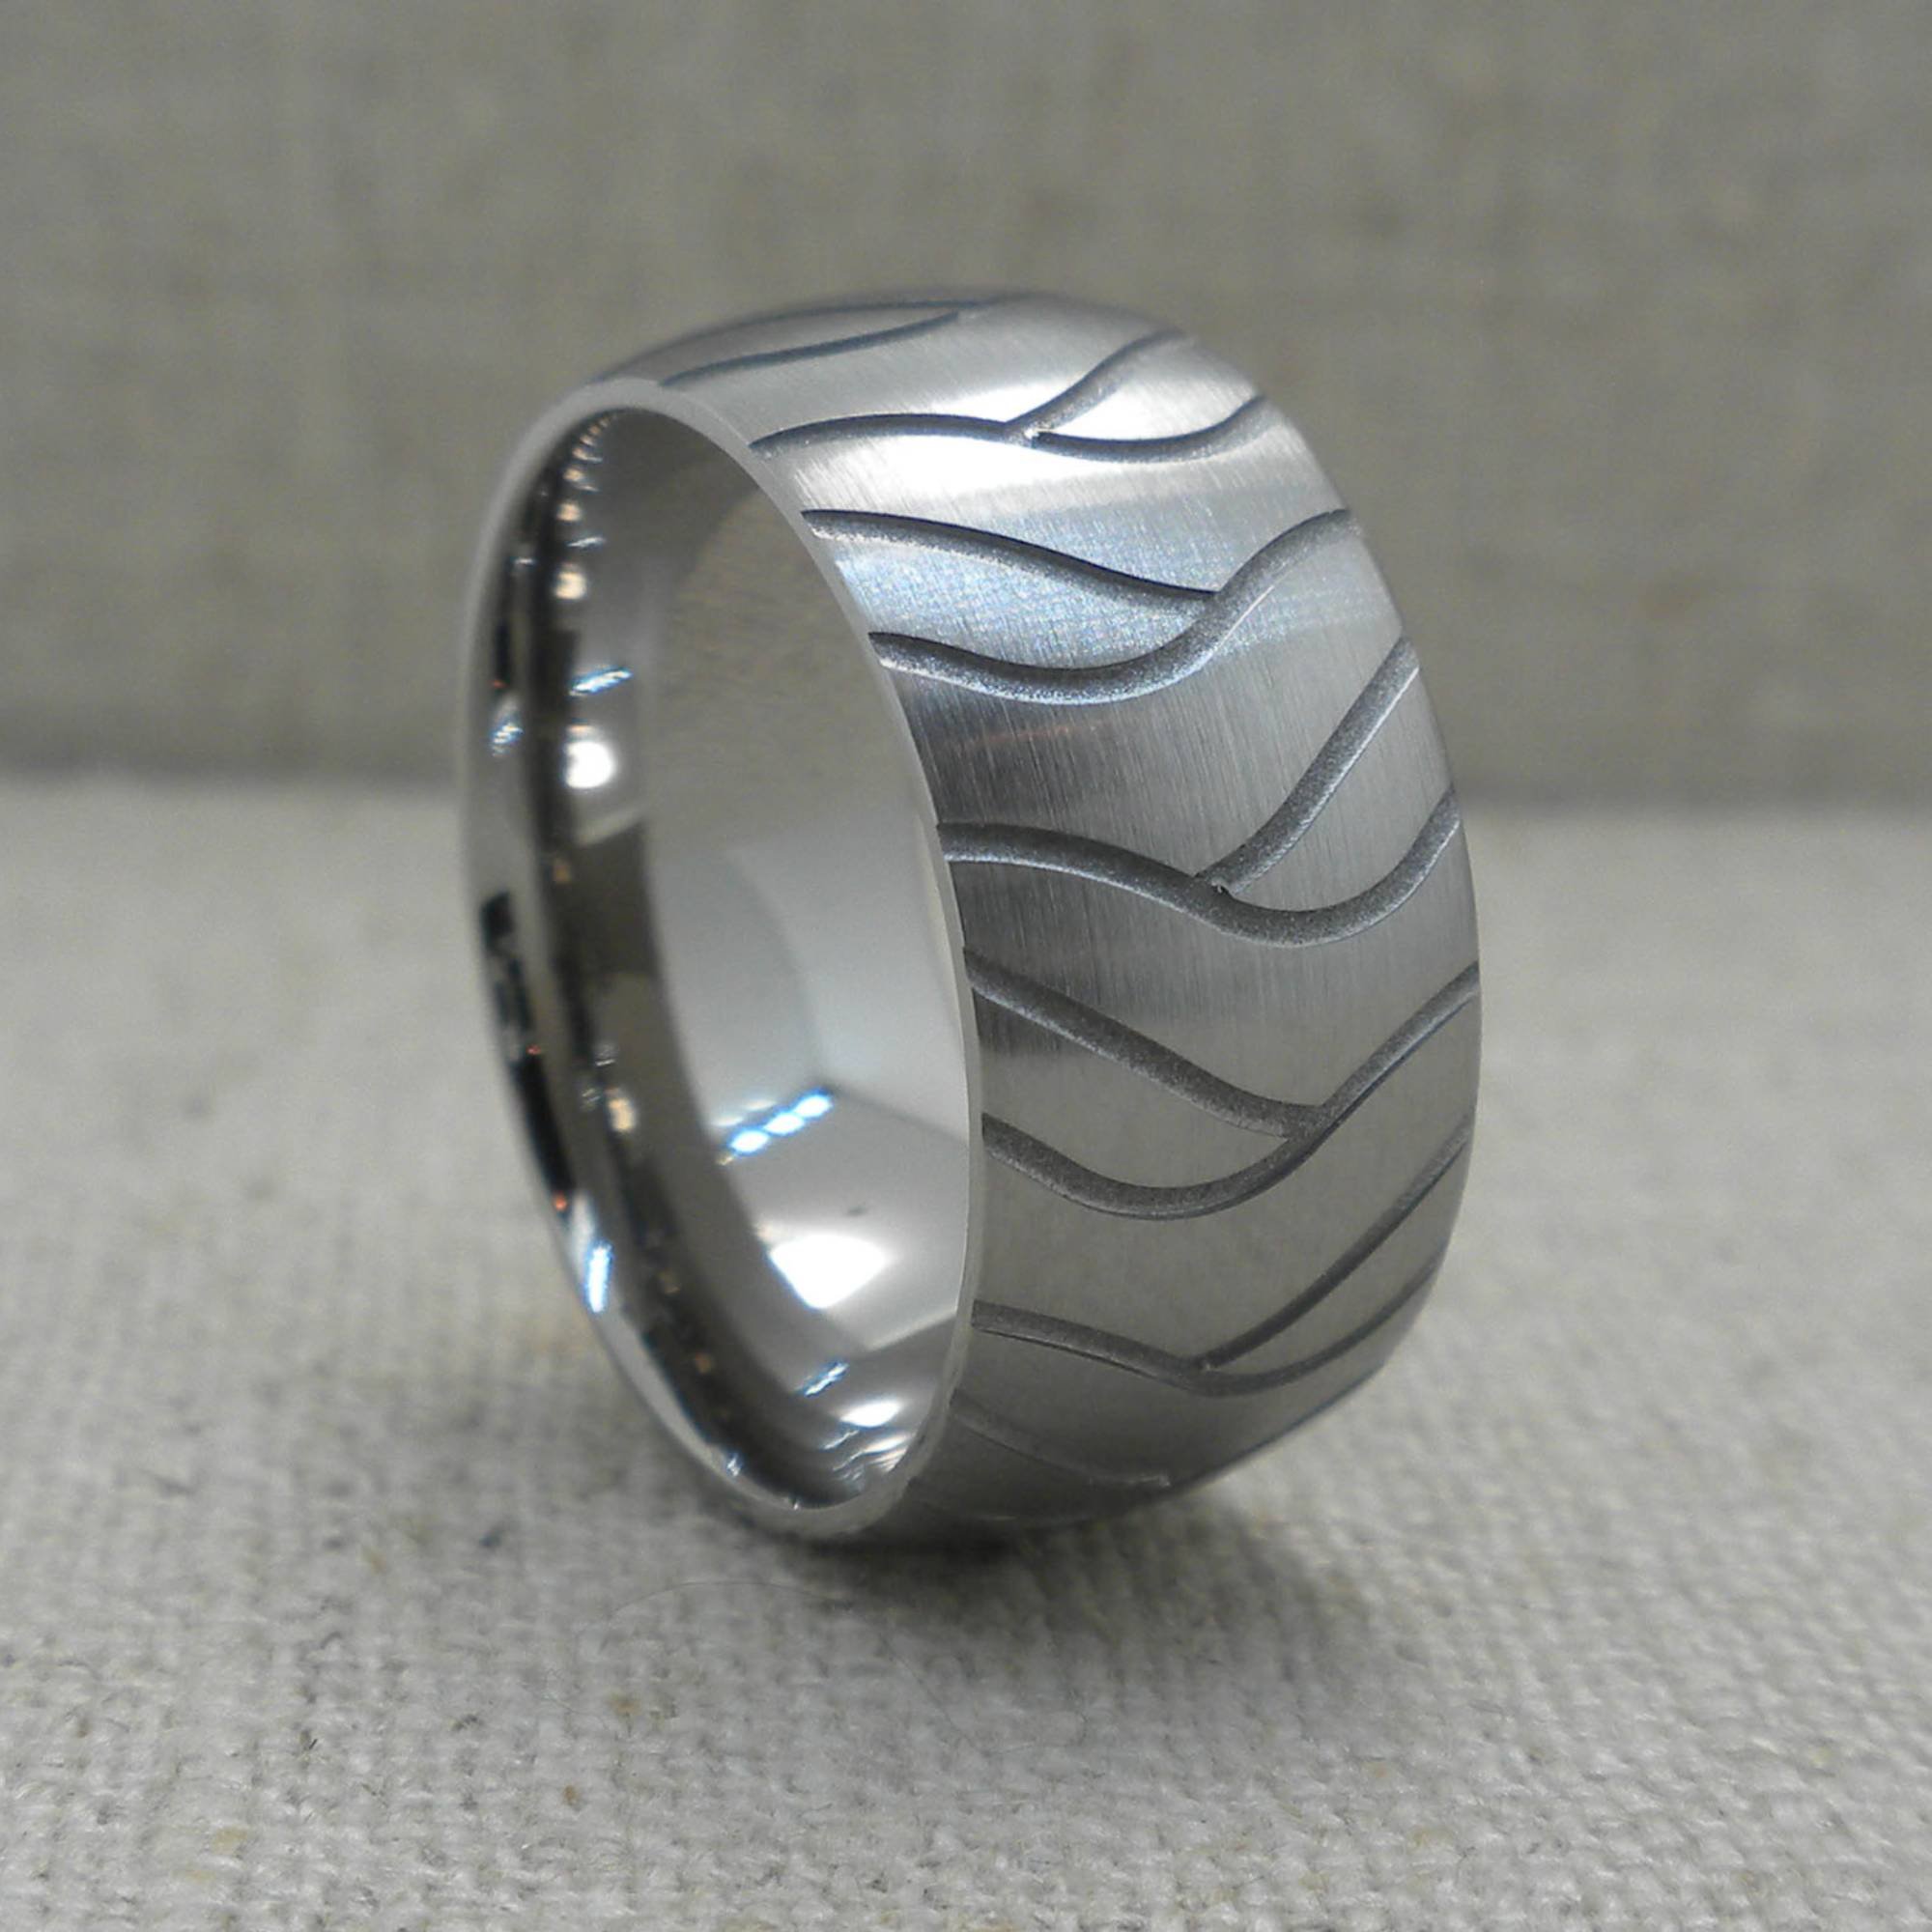 Supercycle Tire Wedding Ring